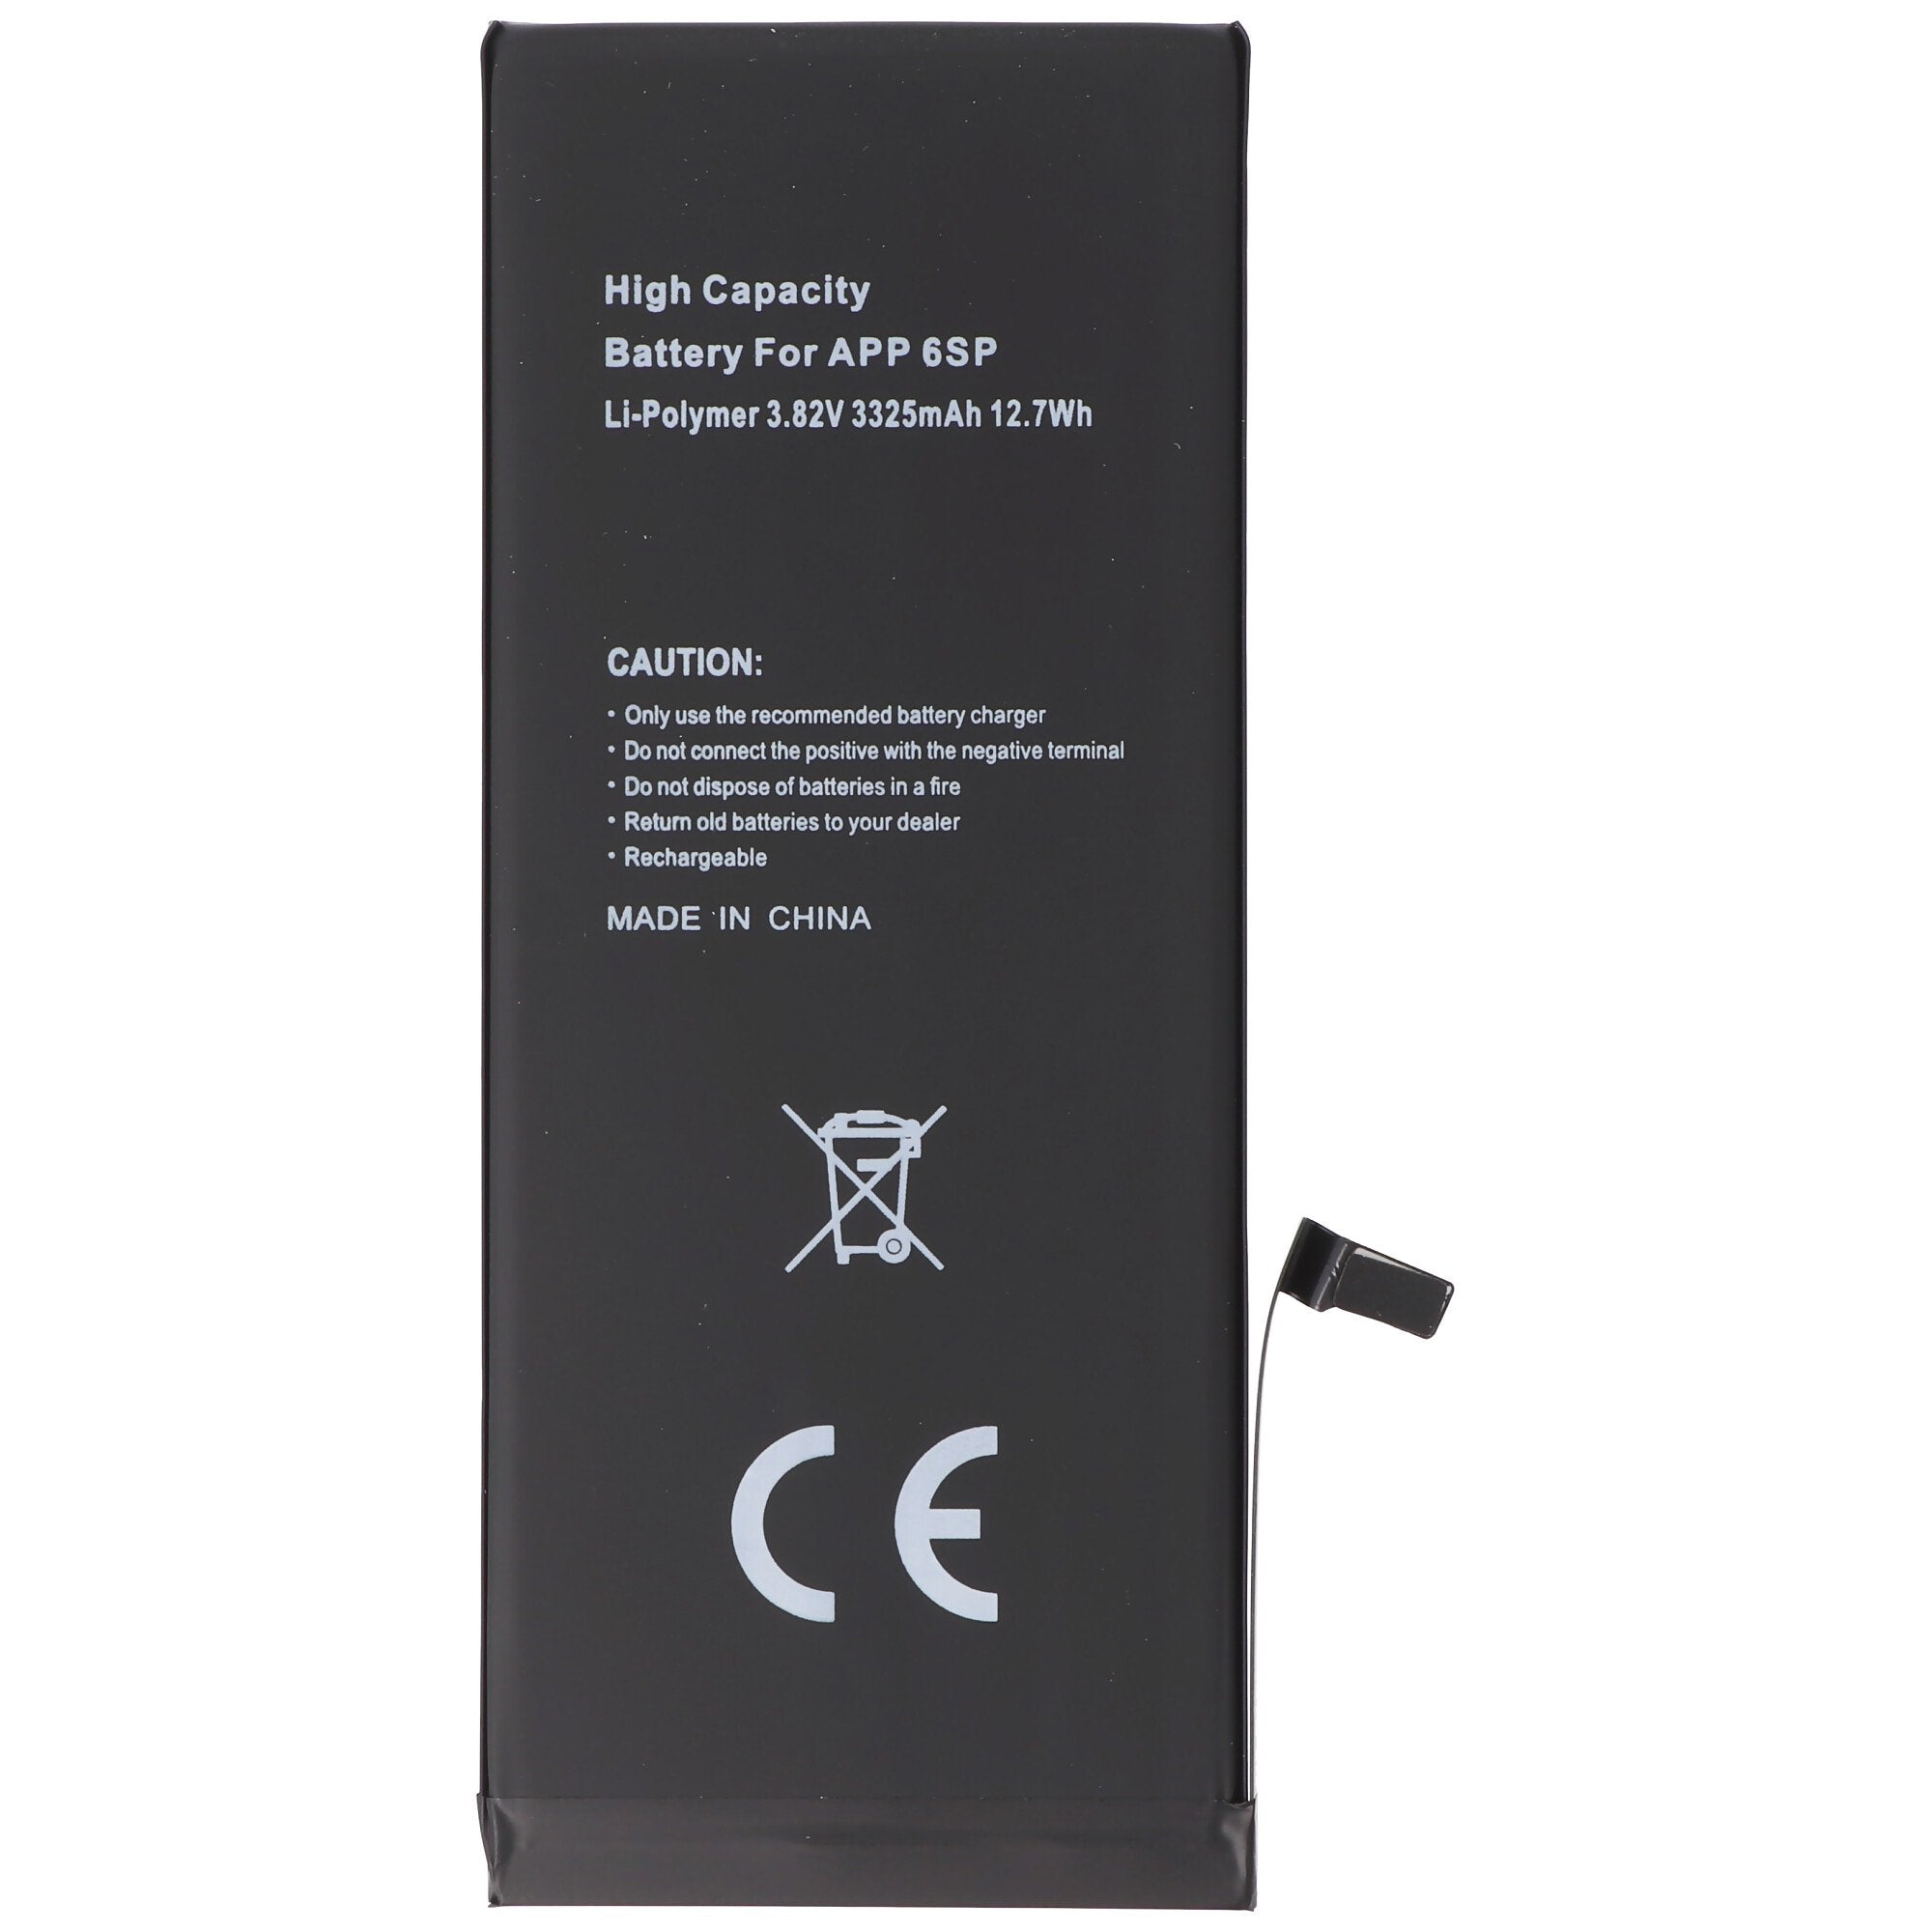 3325mAh high power battery 12.7Wh suitable for the Apple iPhone 6S plus battery 616-00045